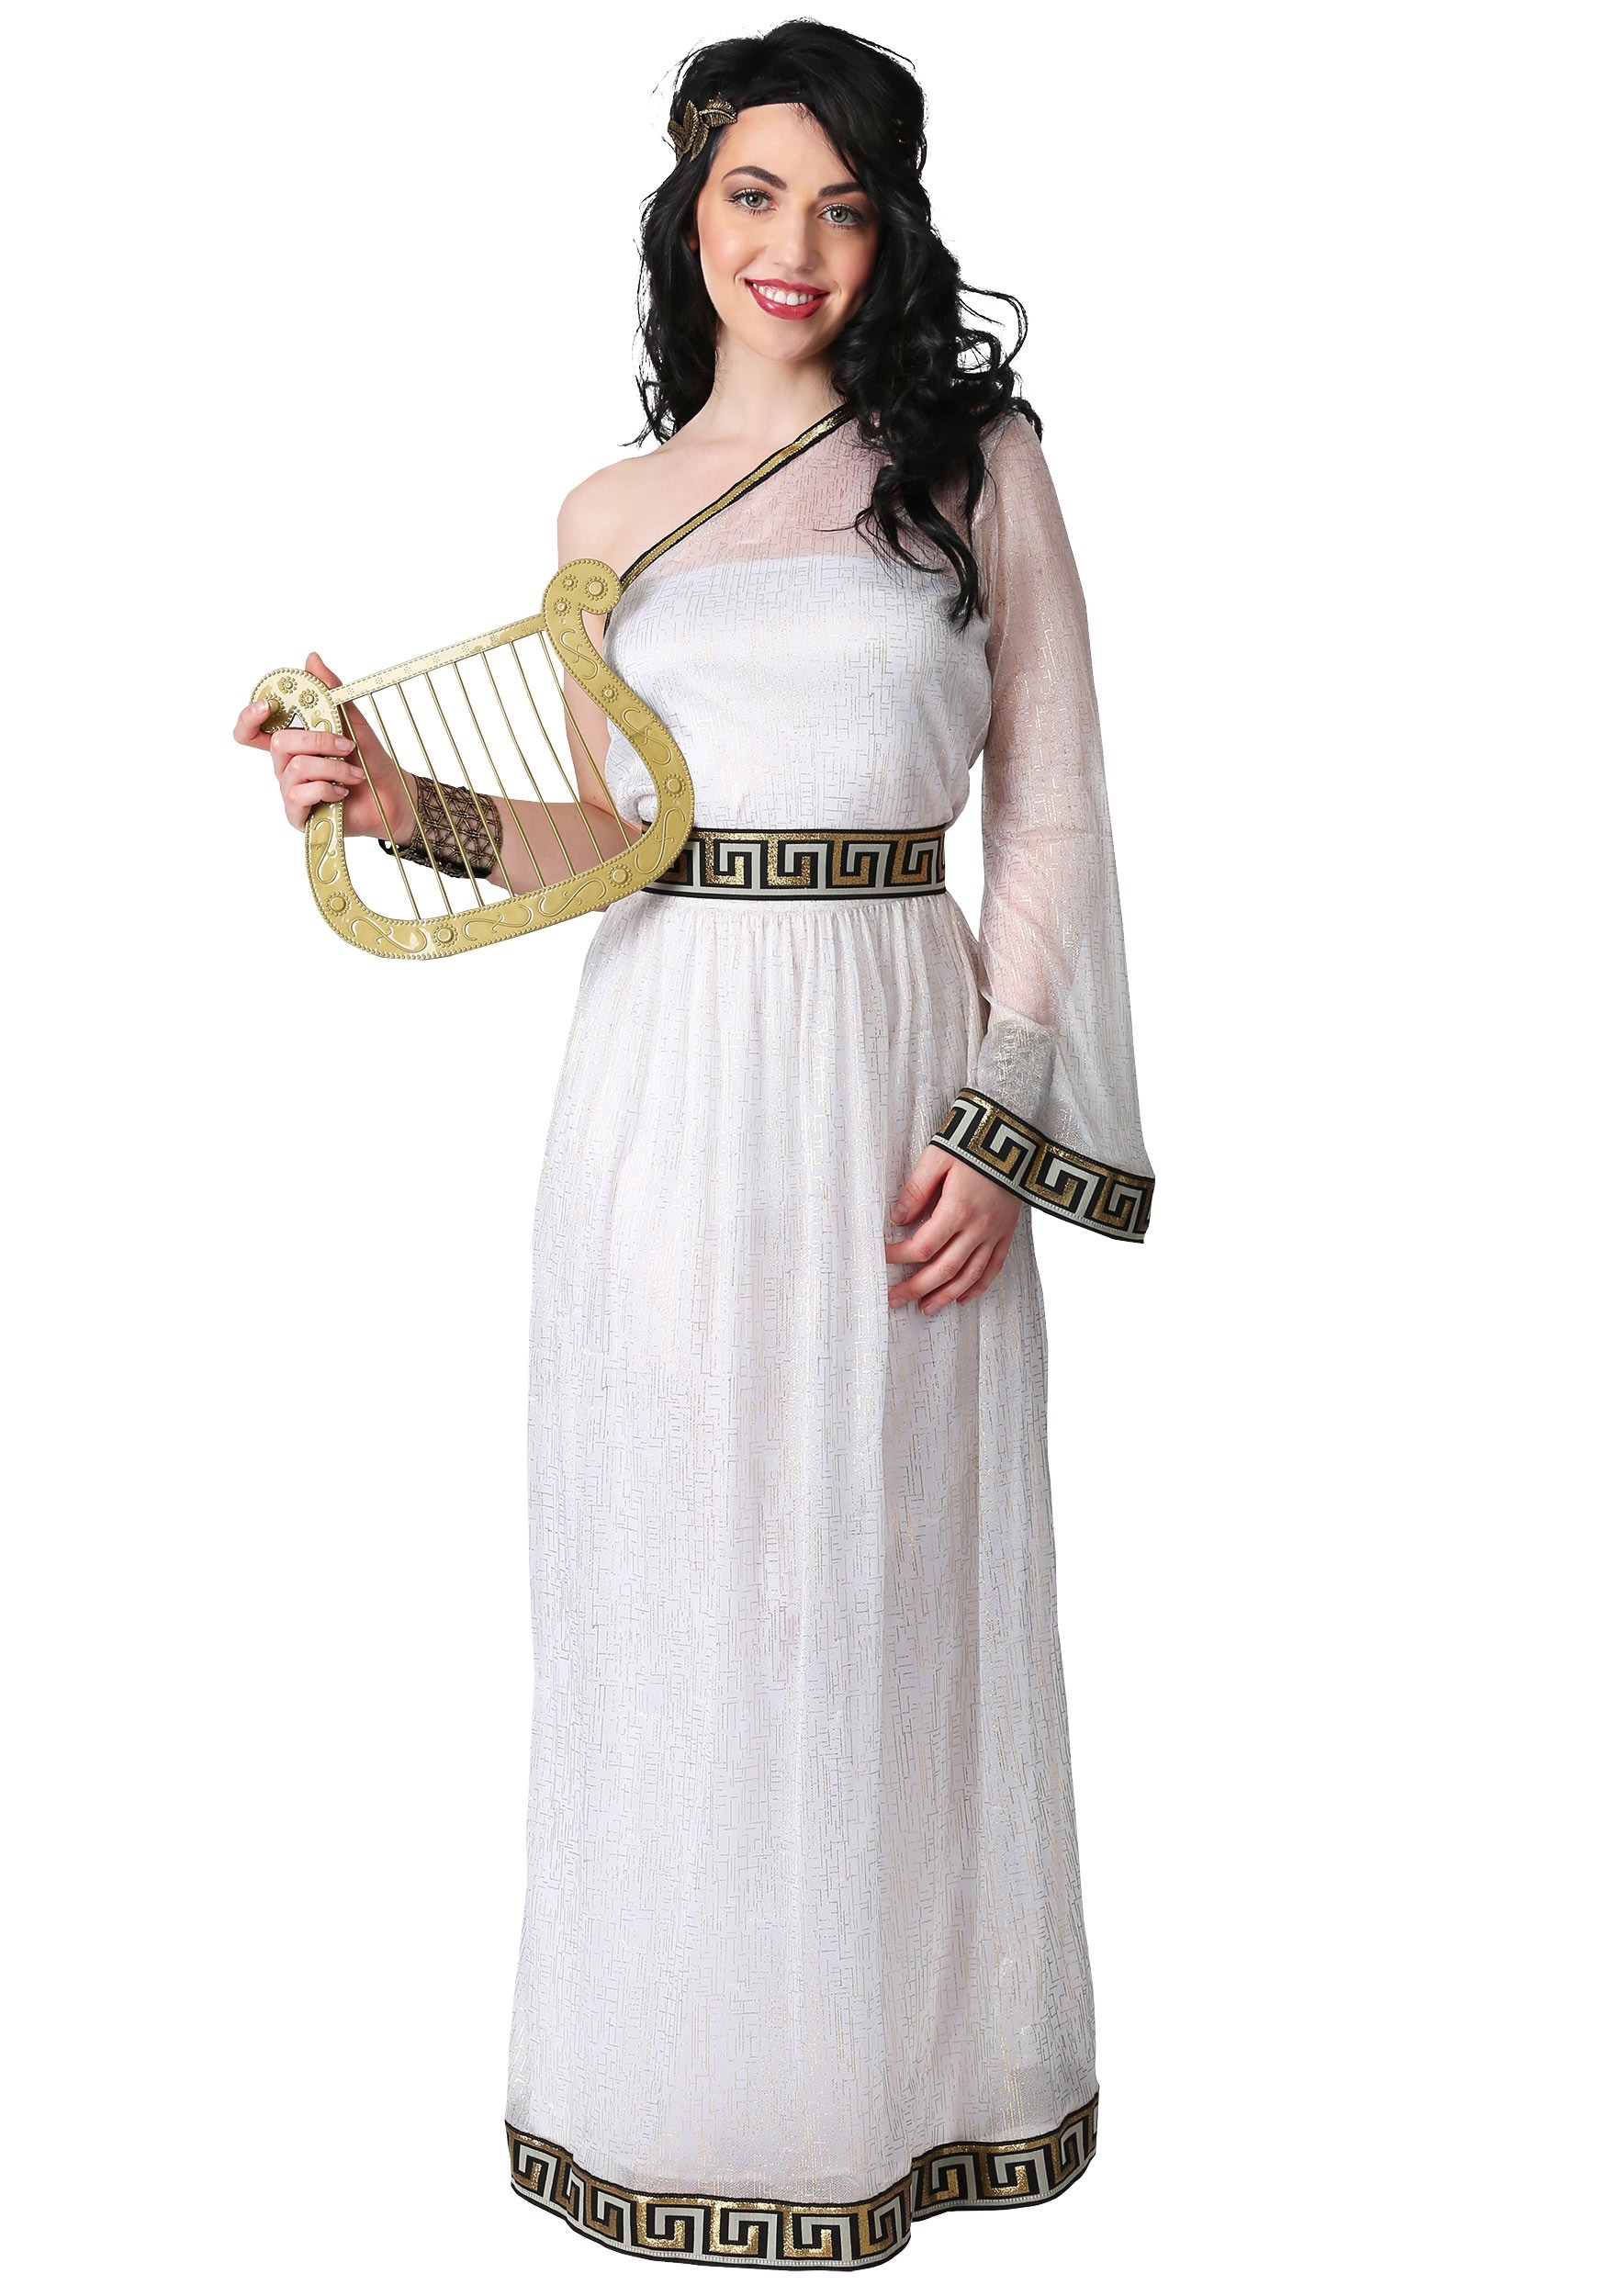 goddess costume with sleeves